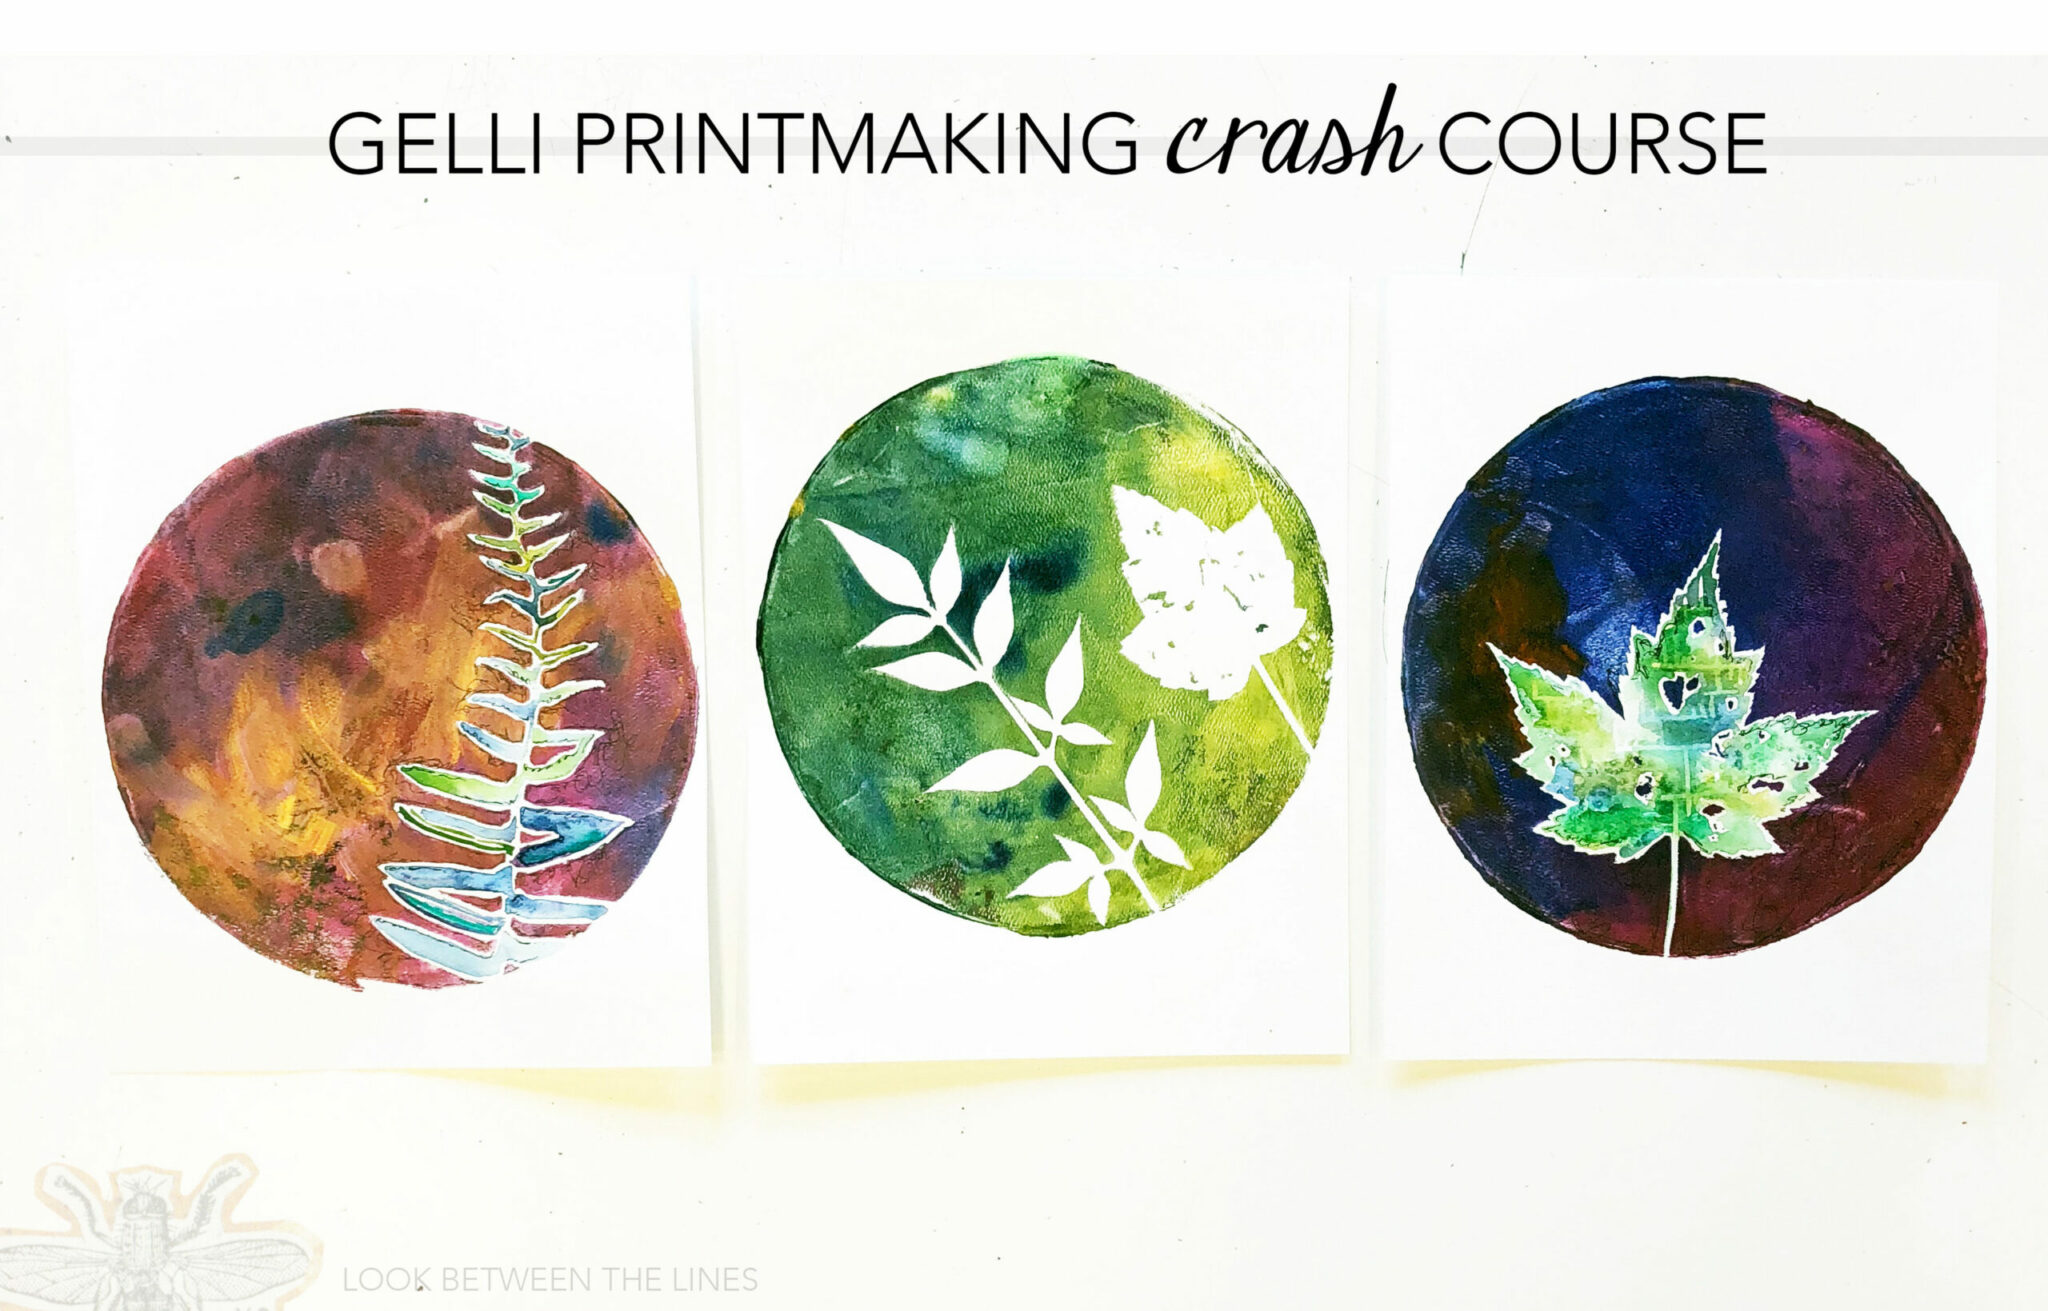 Gelli Printing Ideas From a Self Taught Printmaker